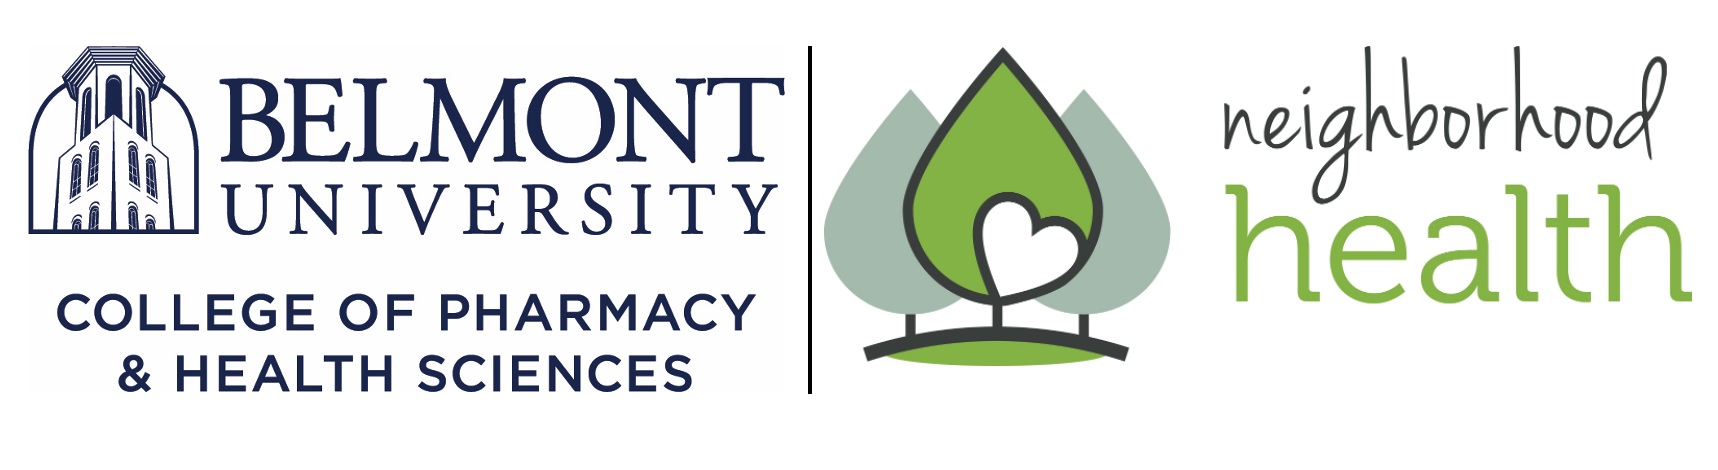 Logos for Belmont University College of Pharmacy & Health Sciences and Neighborhood Health